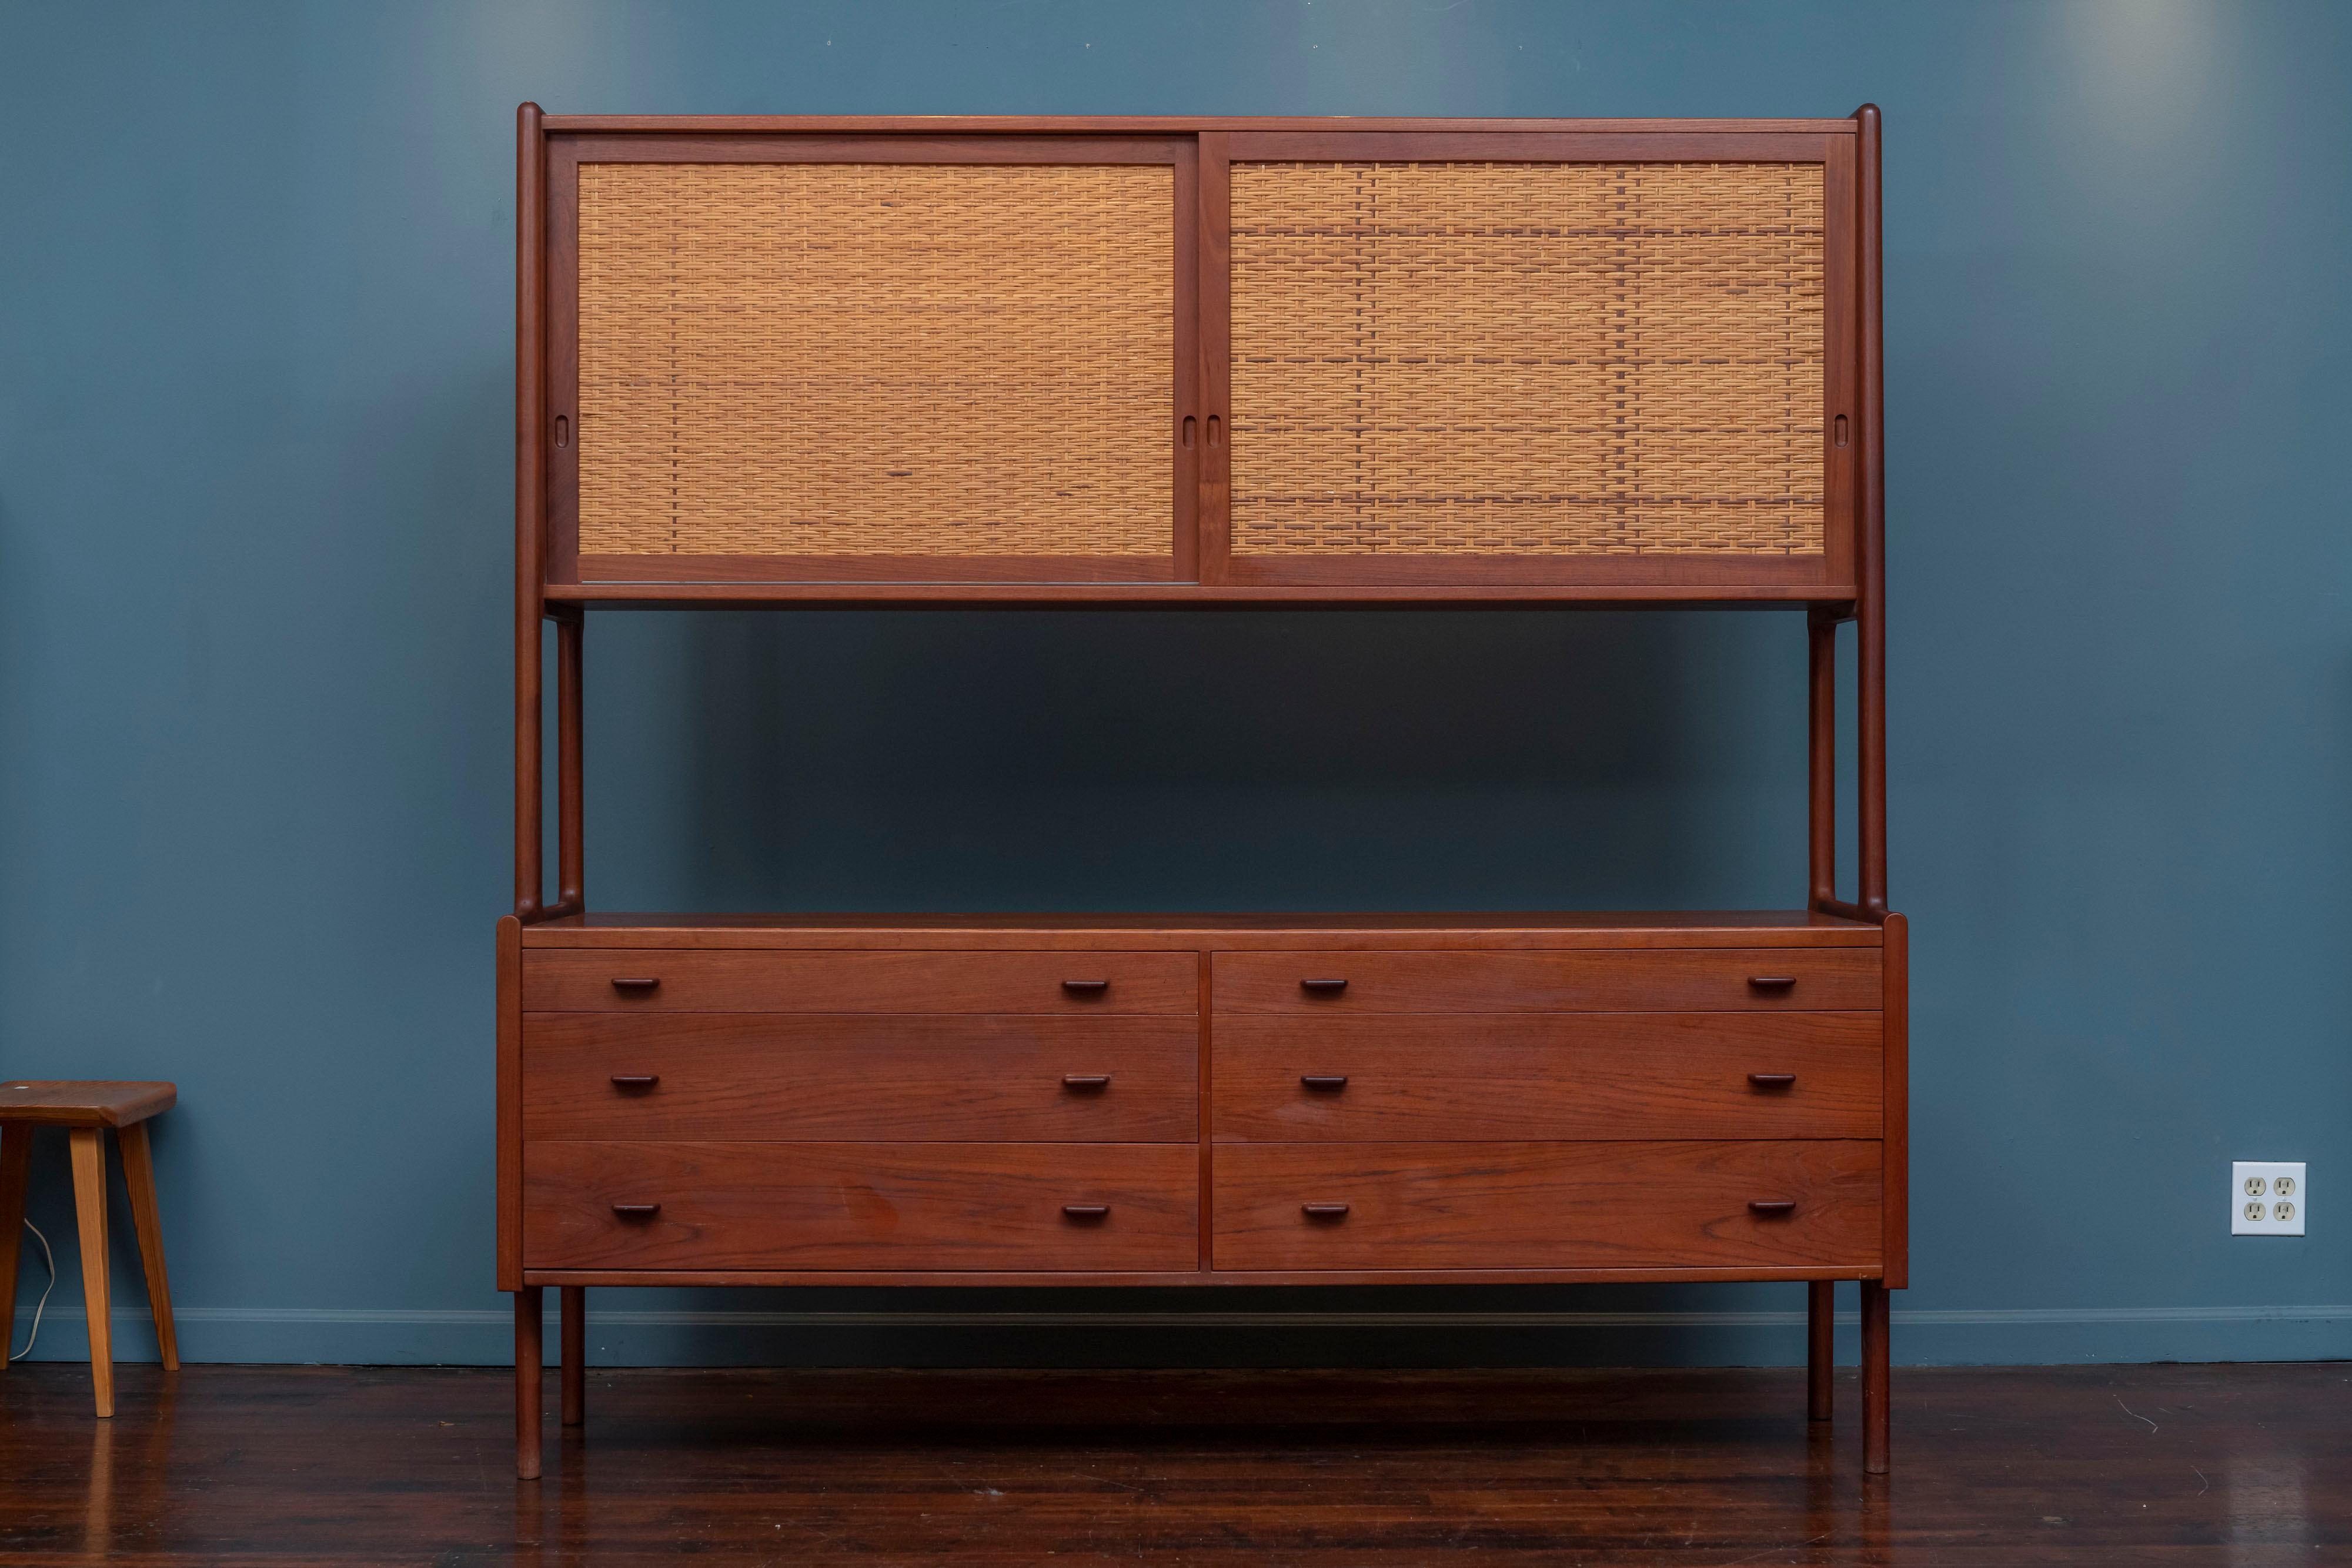 Hans Wegner credenza or hutch for RY-Mobler, Denmark. High quality construction and materials executed by Hans Wegner for Ry Mobler, Model RY 20. Beautiful warm colored teak with dramatic grains thorought and two caned sliding doors with two